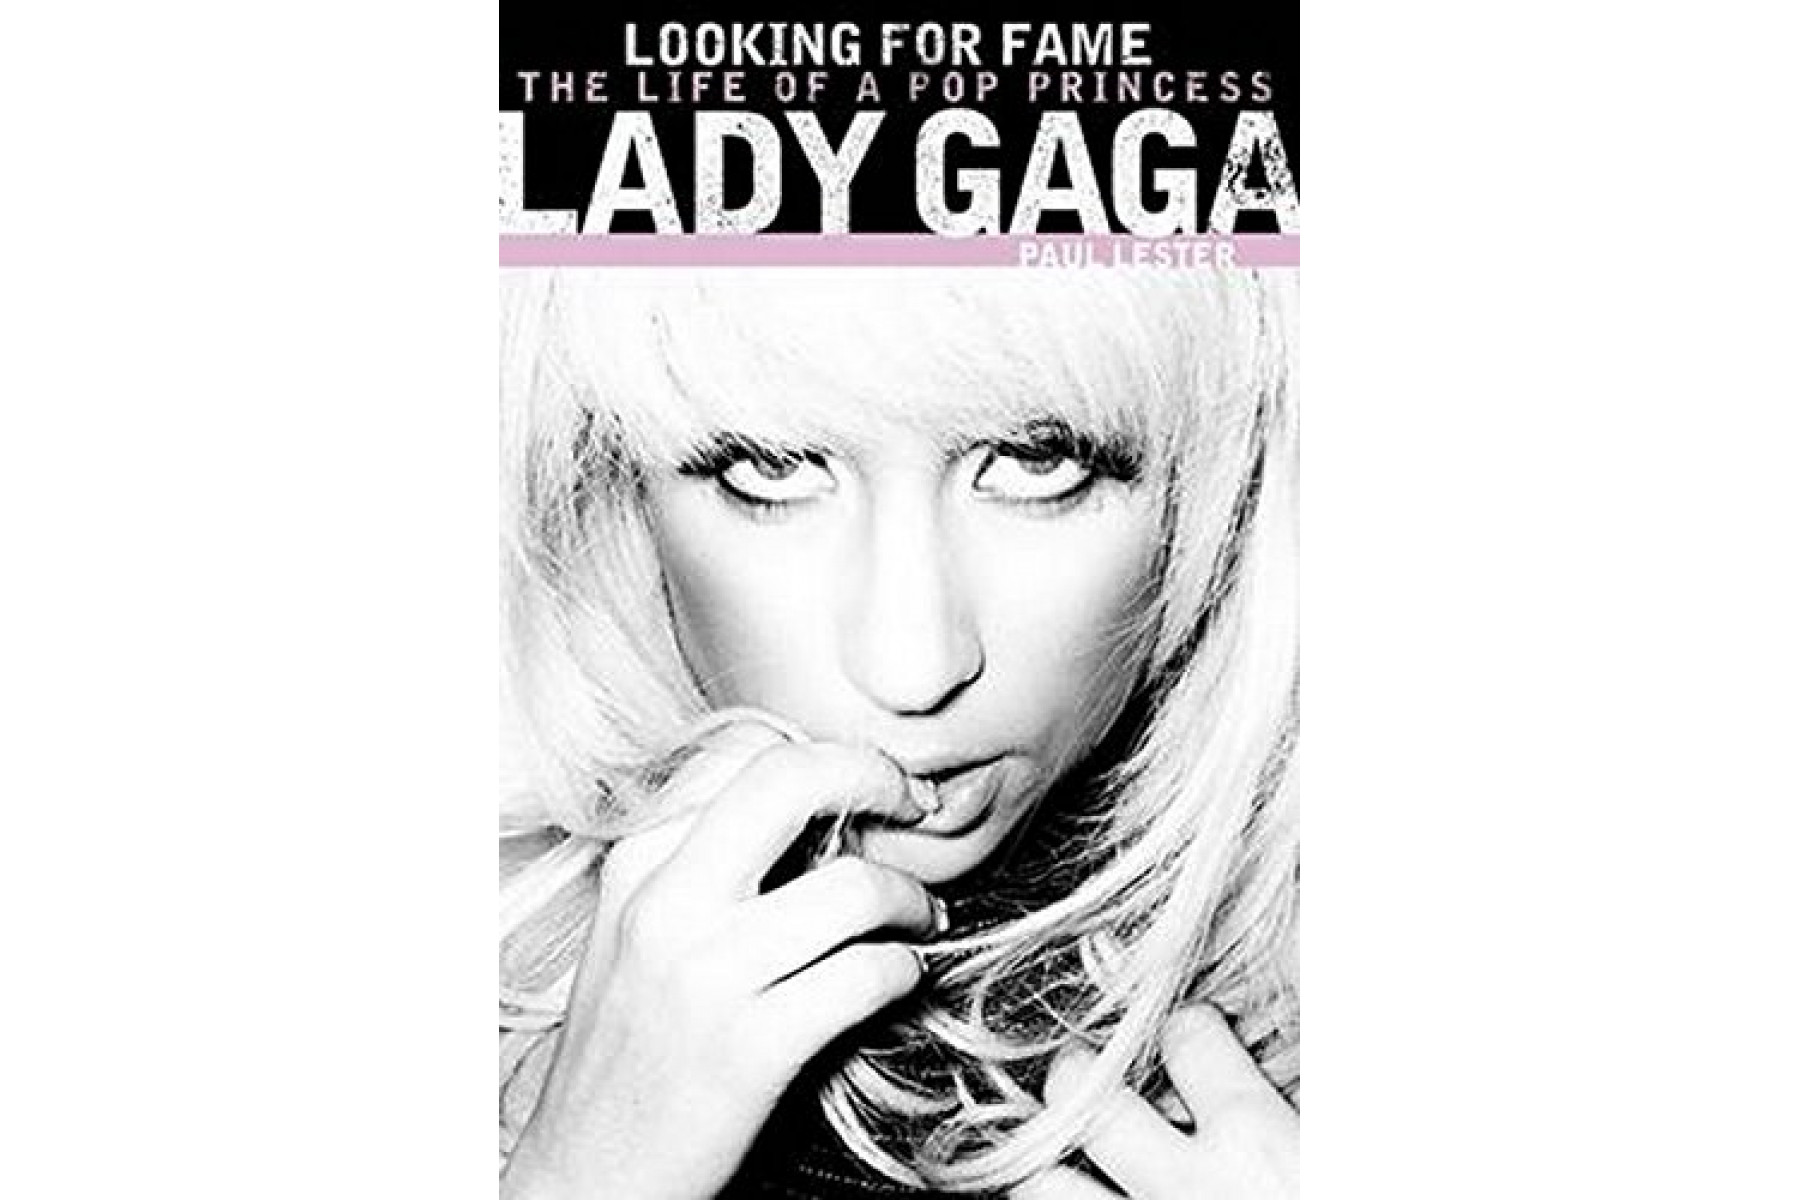 Lady Gaga: Looking for Fame